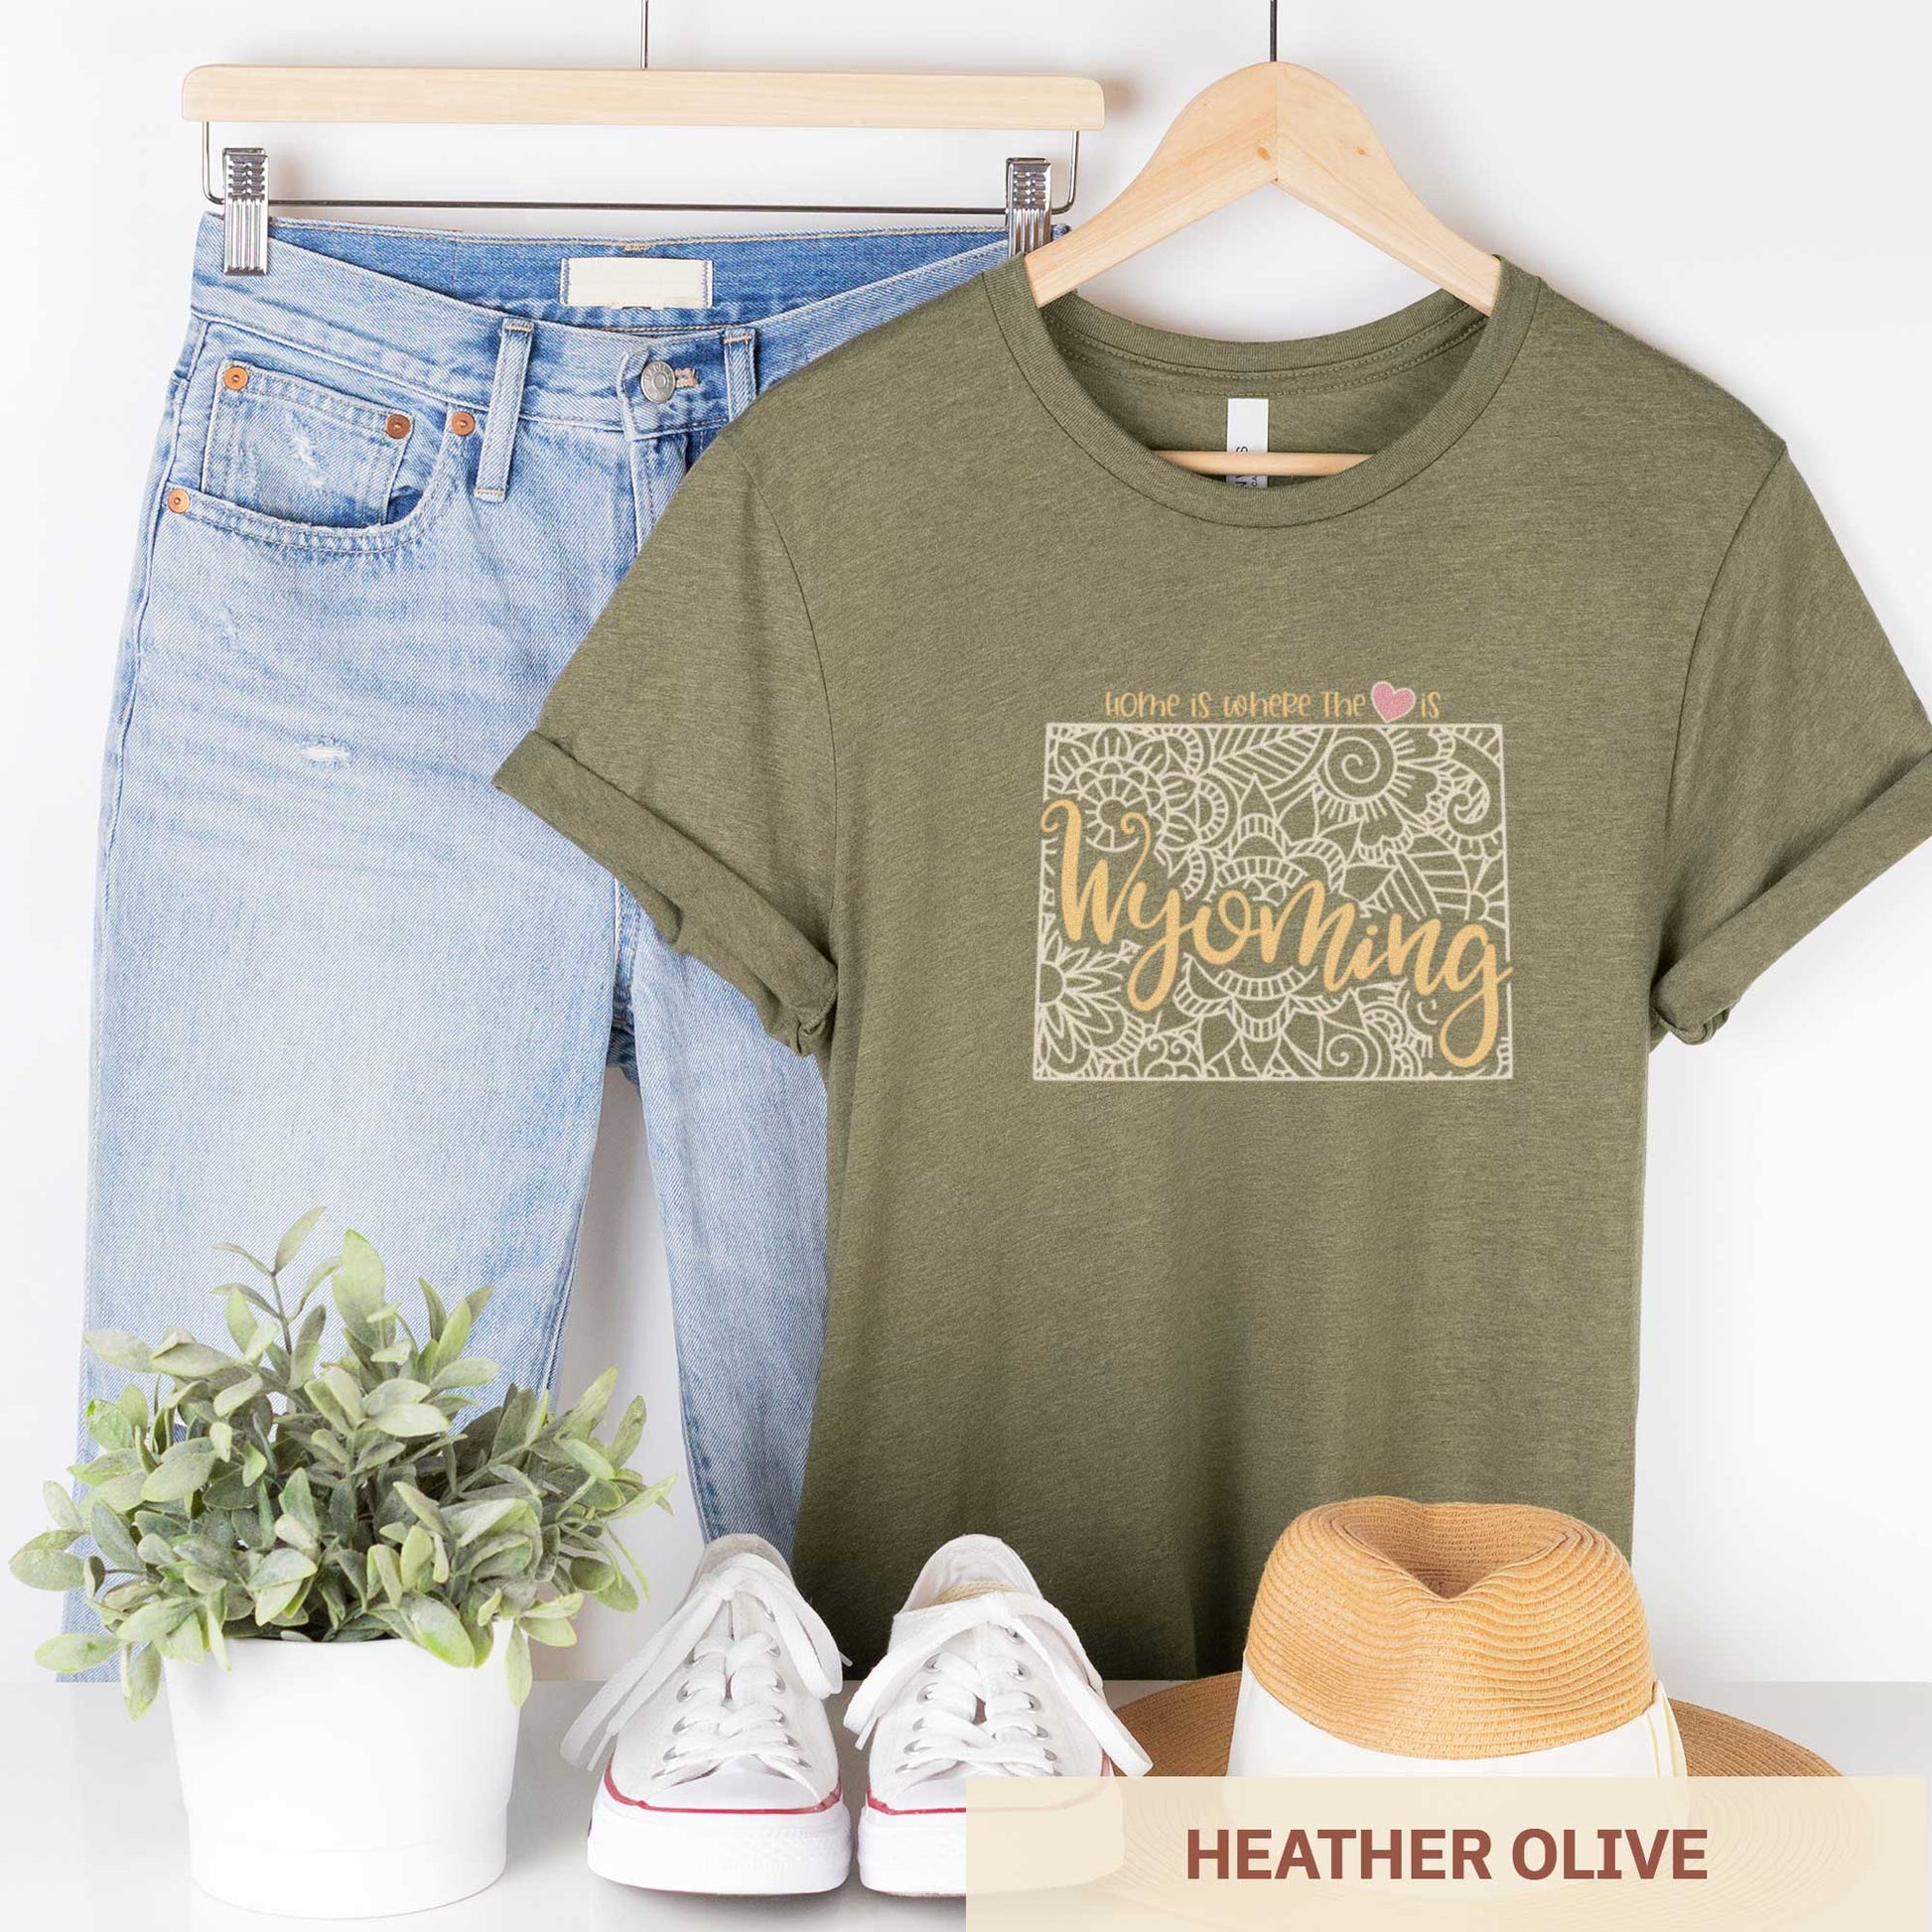 A hanging heather olive Bella Canvas t-shirt featuring a mandala in the shape of Wyoming with the words home is where the heart is.